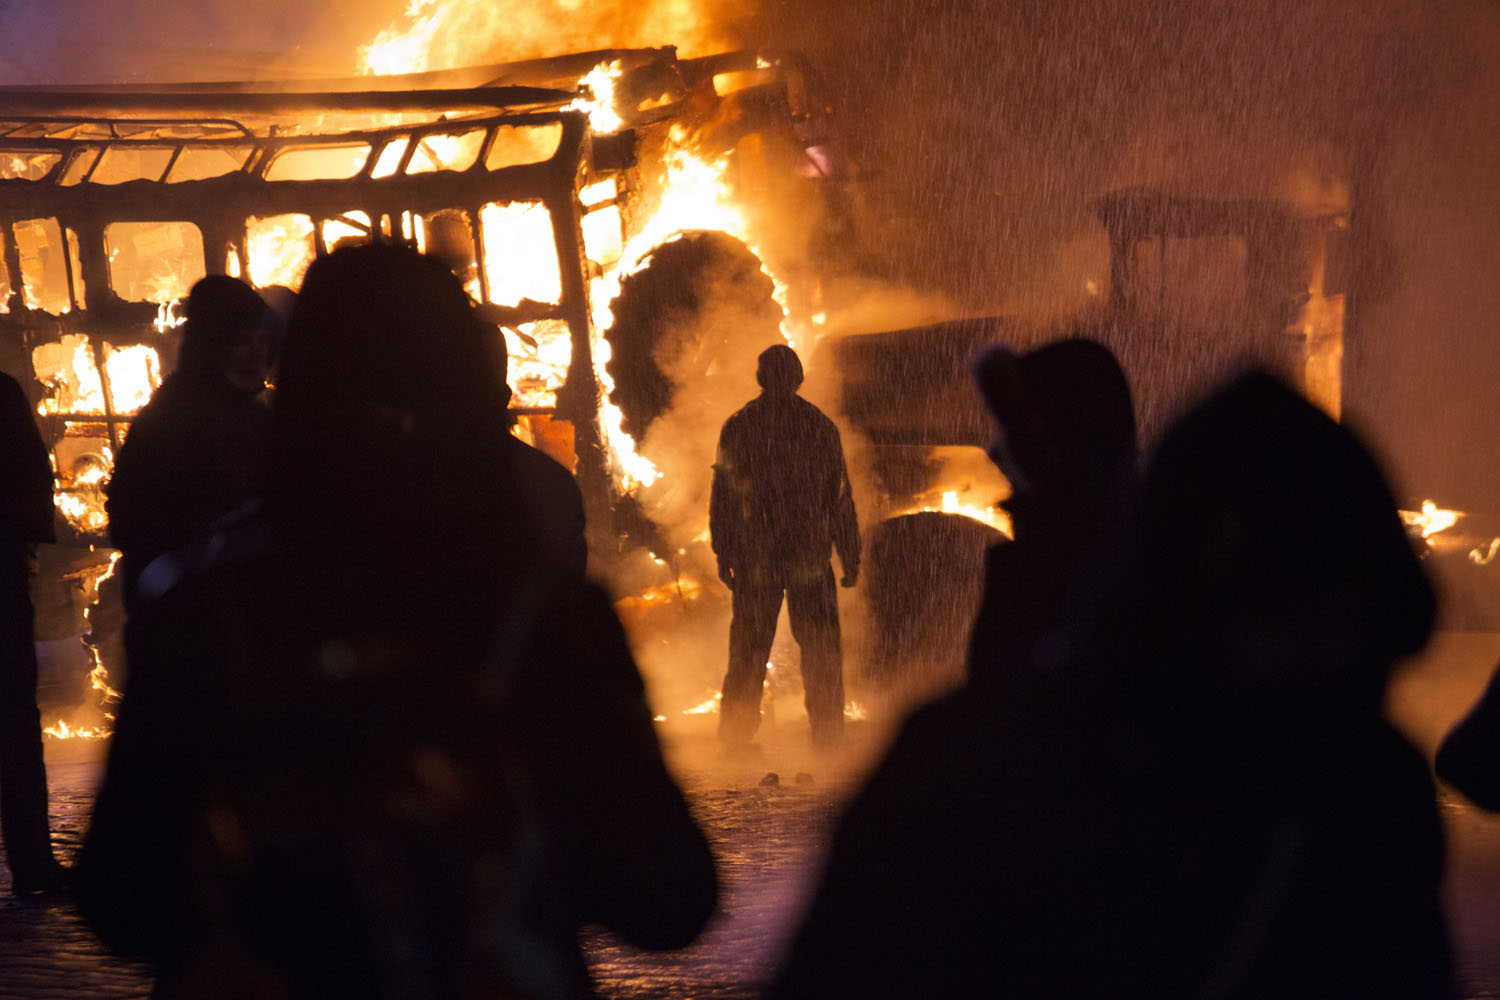 A demonstrator stands in front of burning vehicles during violent clashes with police near Hrushevsky Street, Jan. 19, 2014.